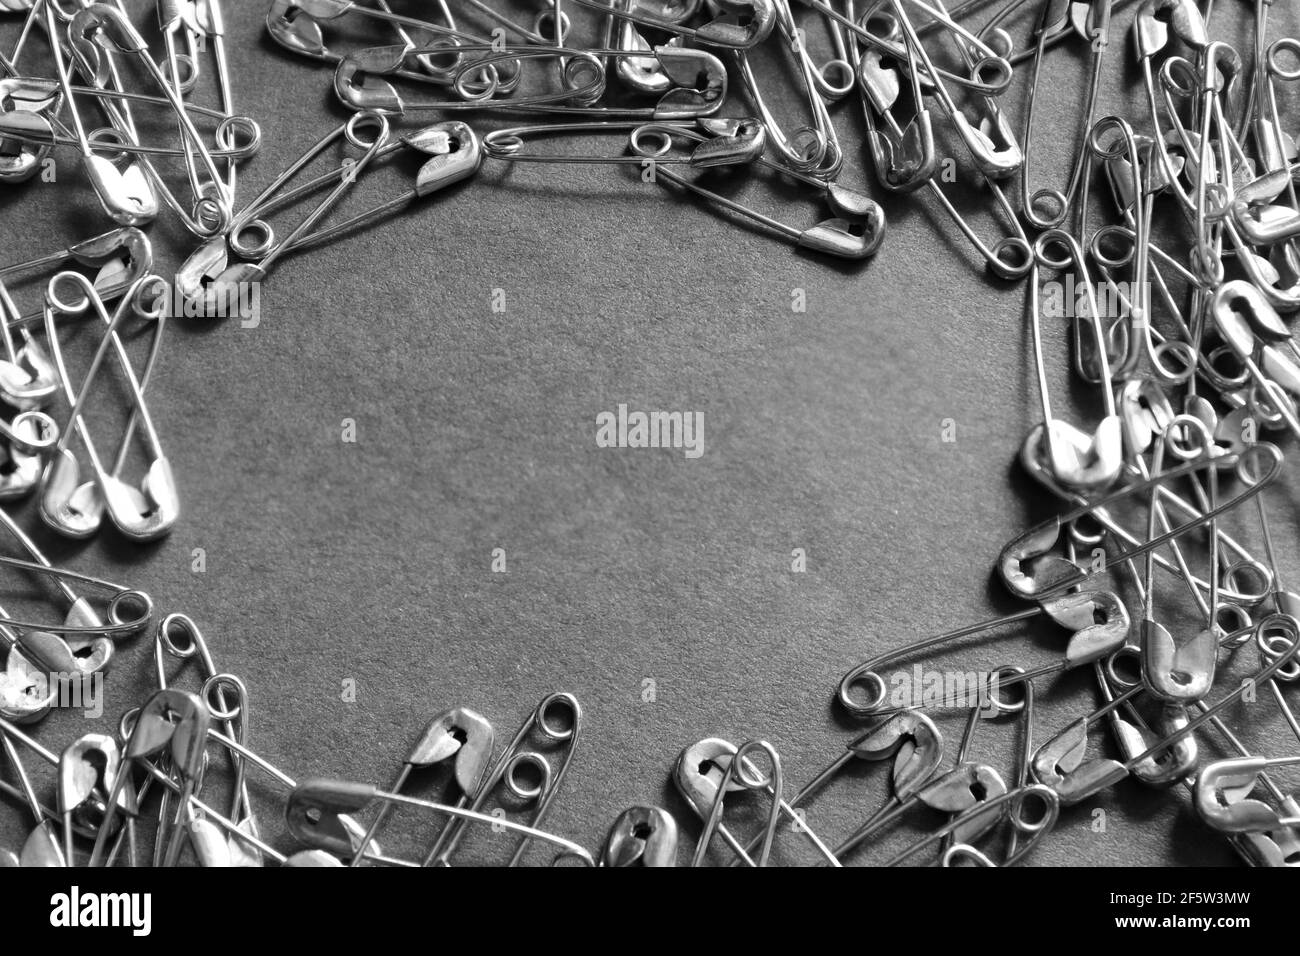 Safety pin on a dark background. Selective focus. Stock Photo